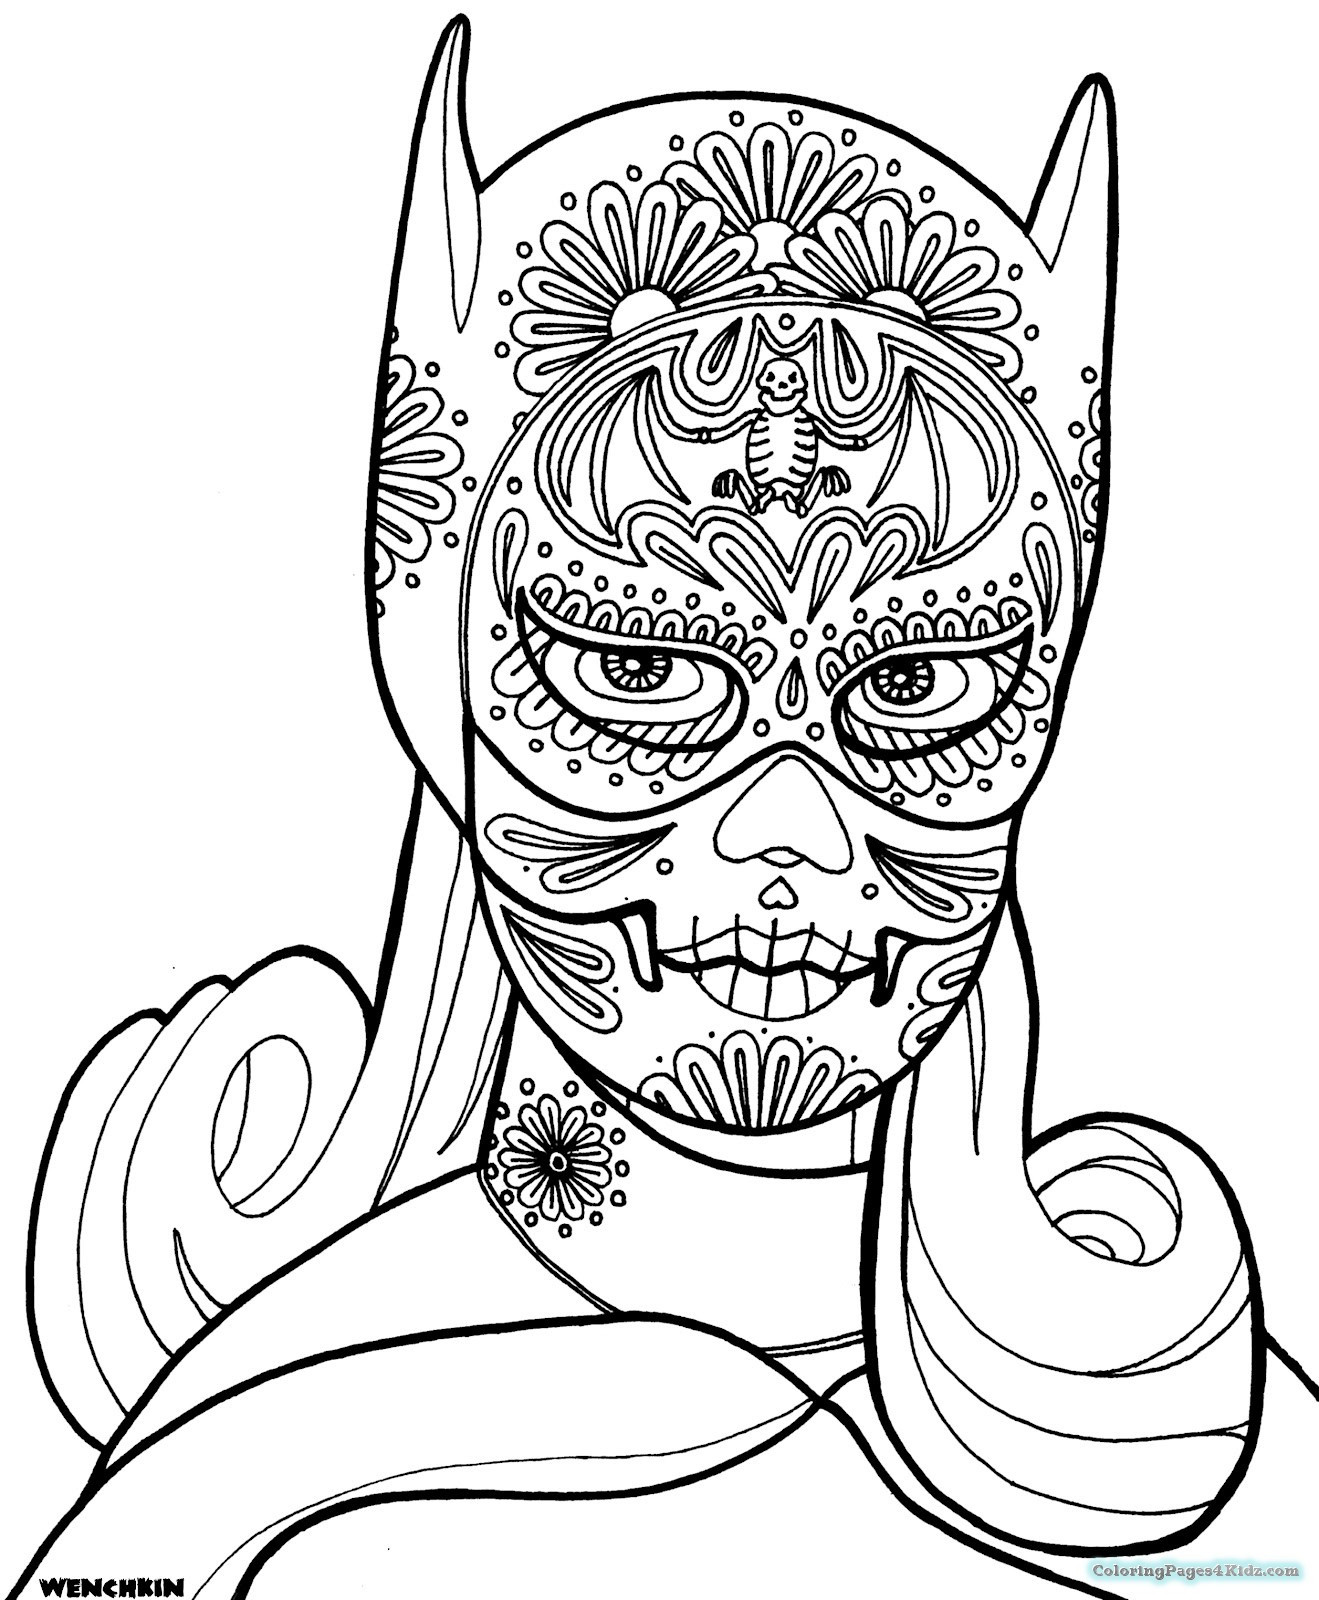 Coloring Sheets For Girls Skull
 Sugar Skull Girl Coloring Pages For Adults